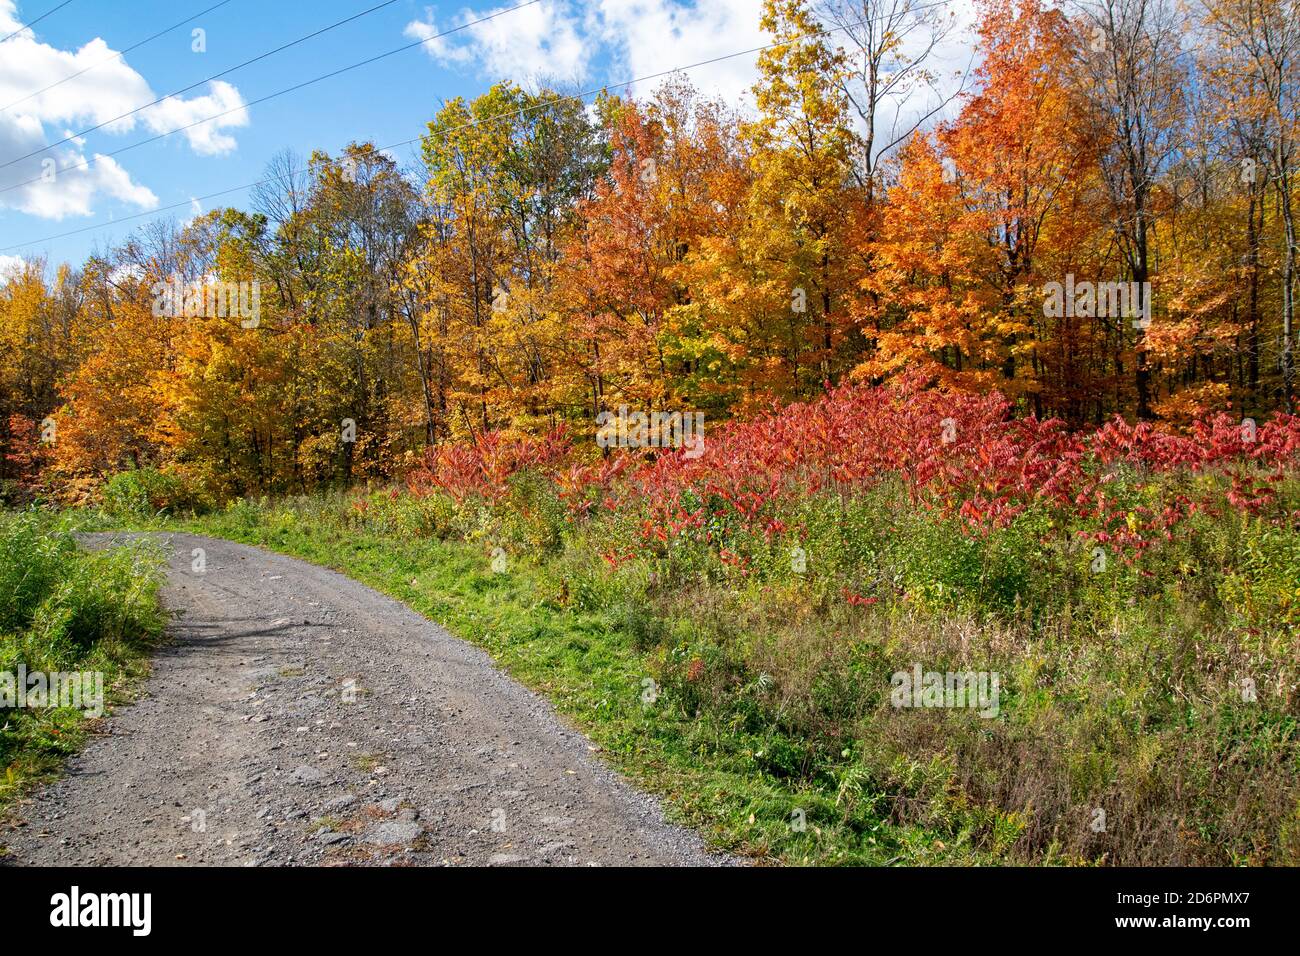 A country road in autumn. Stock Photo